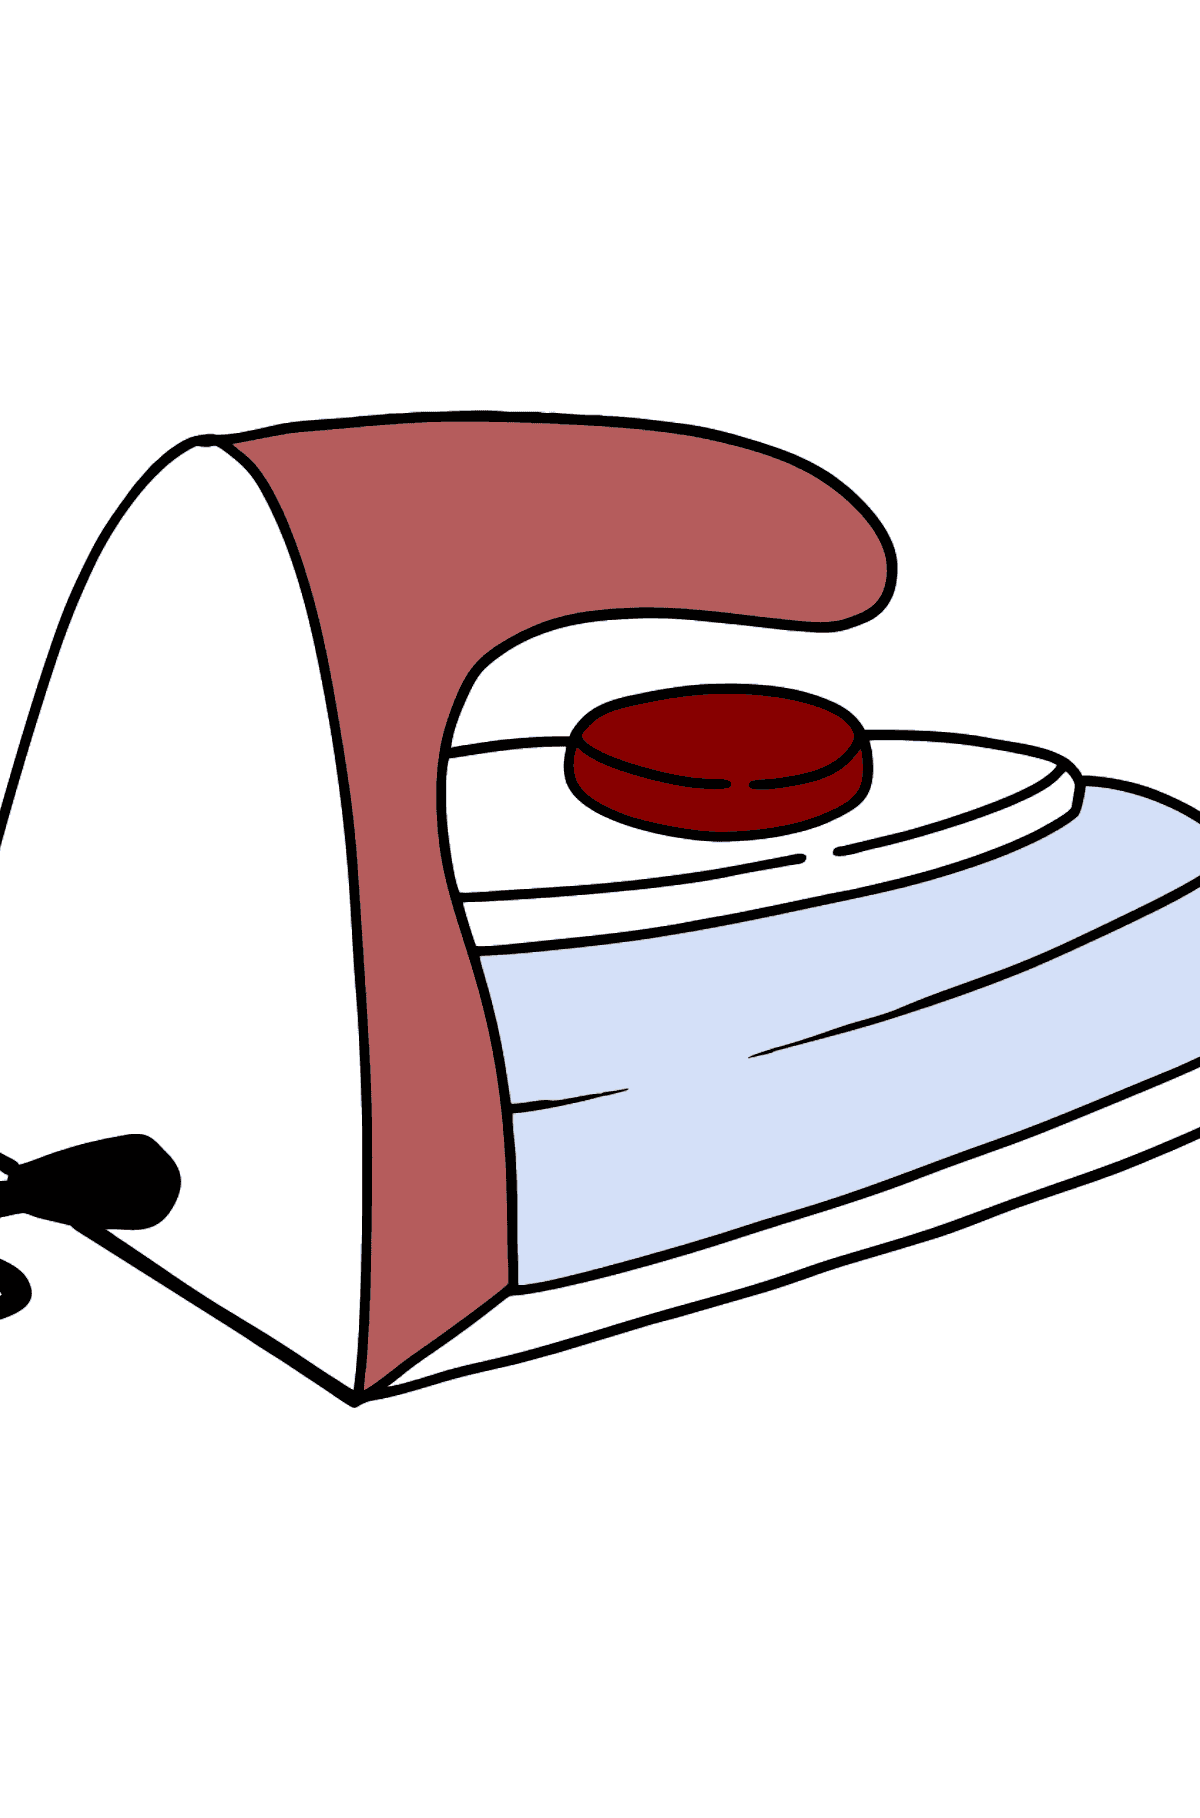 Iron for ironing coloring page - Coloring Pages for Kids